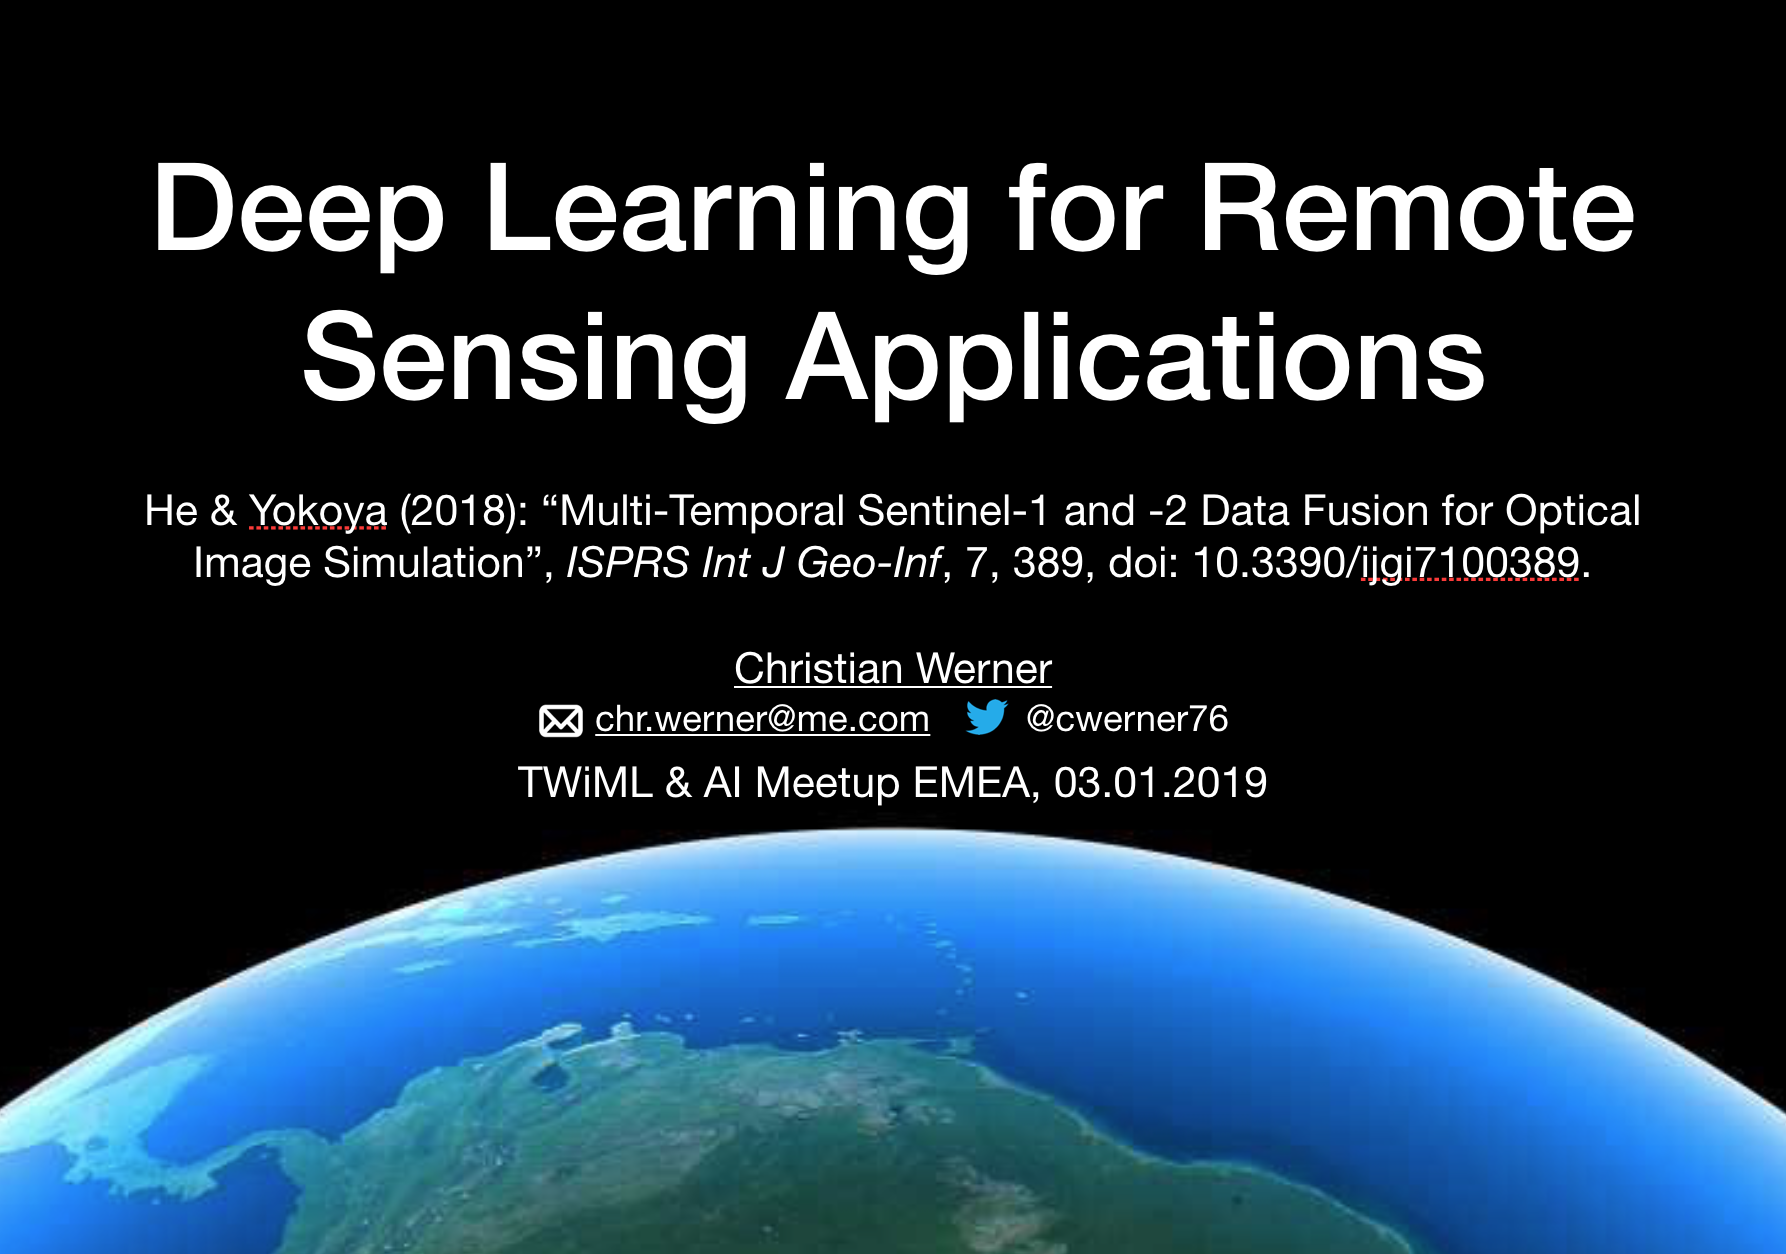 Deep Learning for Remote Sensing